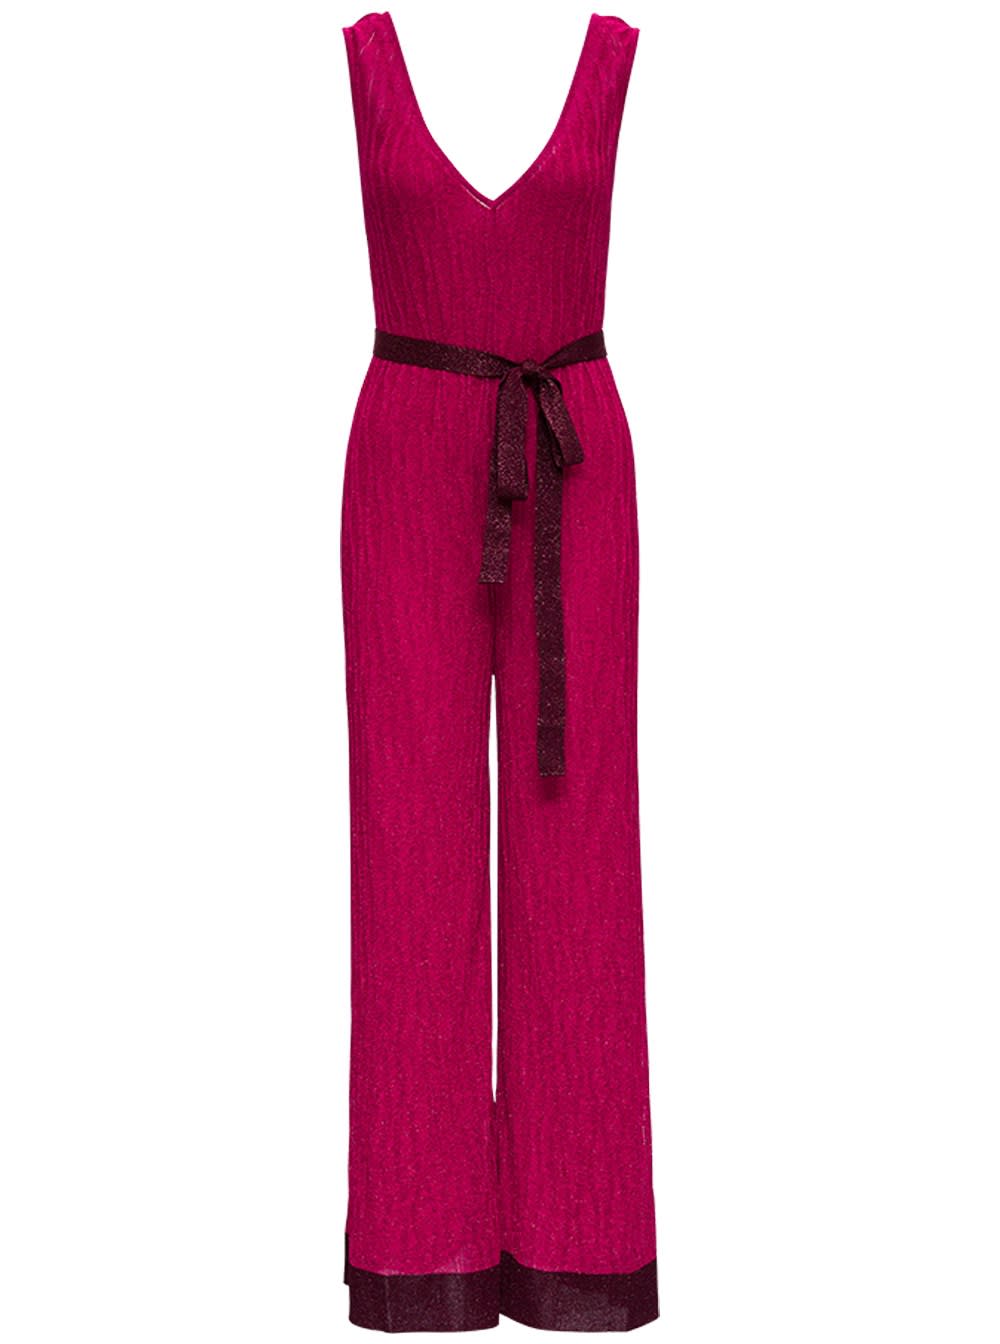 M Missoni Pink Jumpsuit In Rayon Blend With Belt